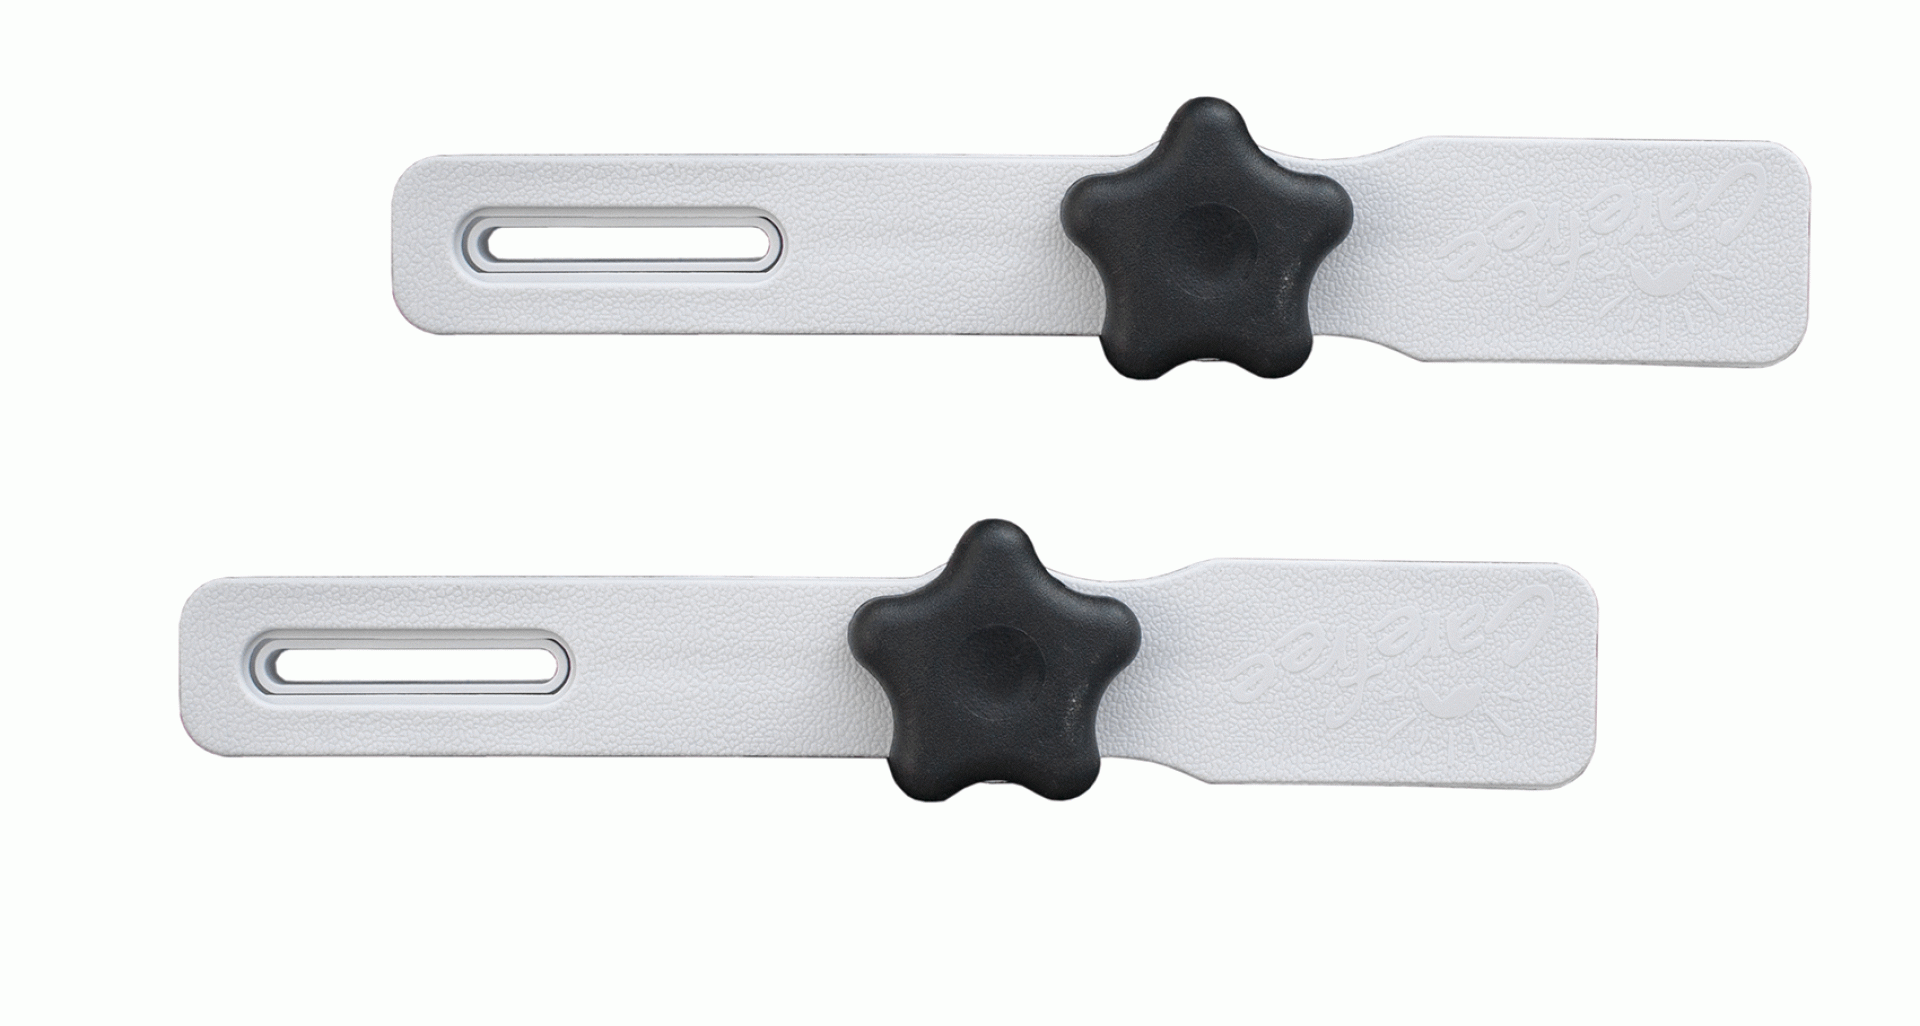 CAREFREE OF COLORADO | 902801W-MP | CANOPY CLAMP - WHITE 2Pk